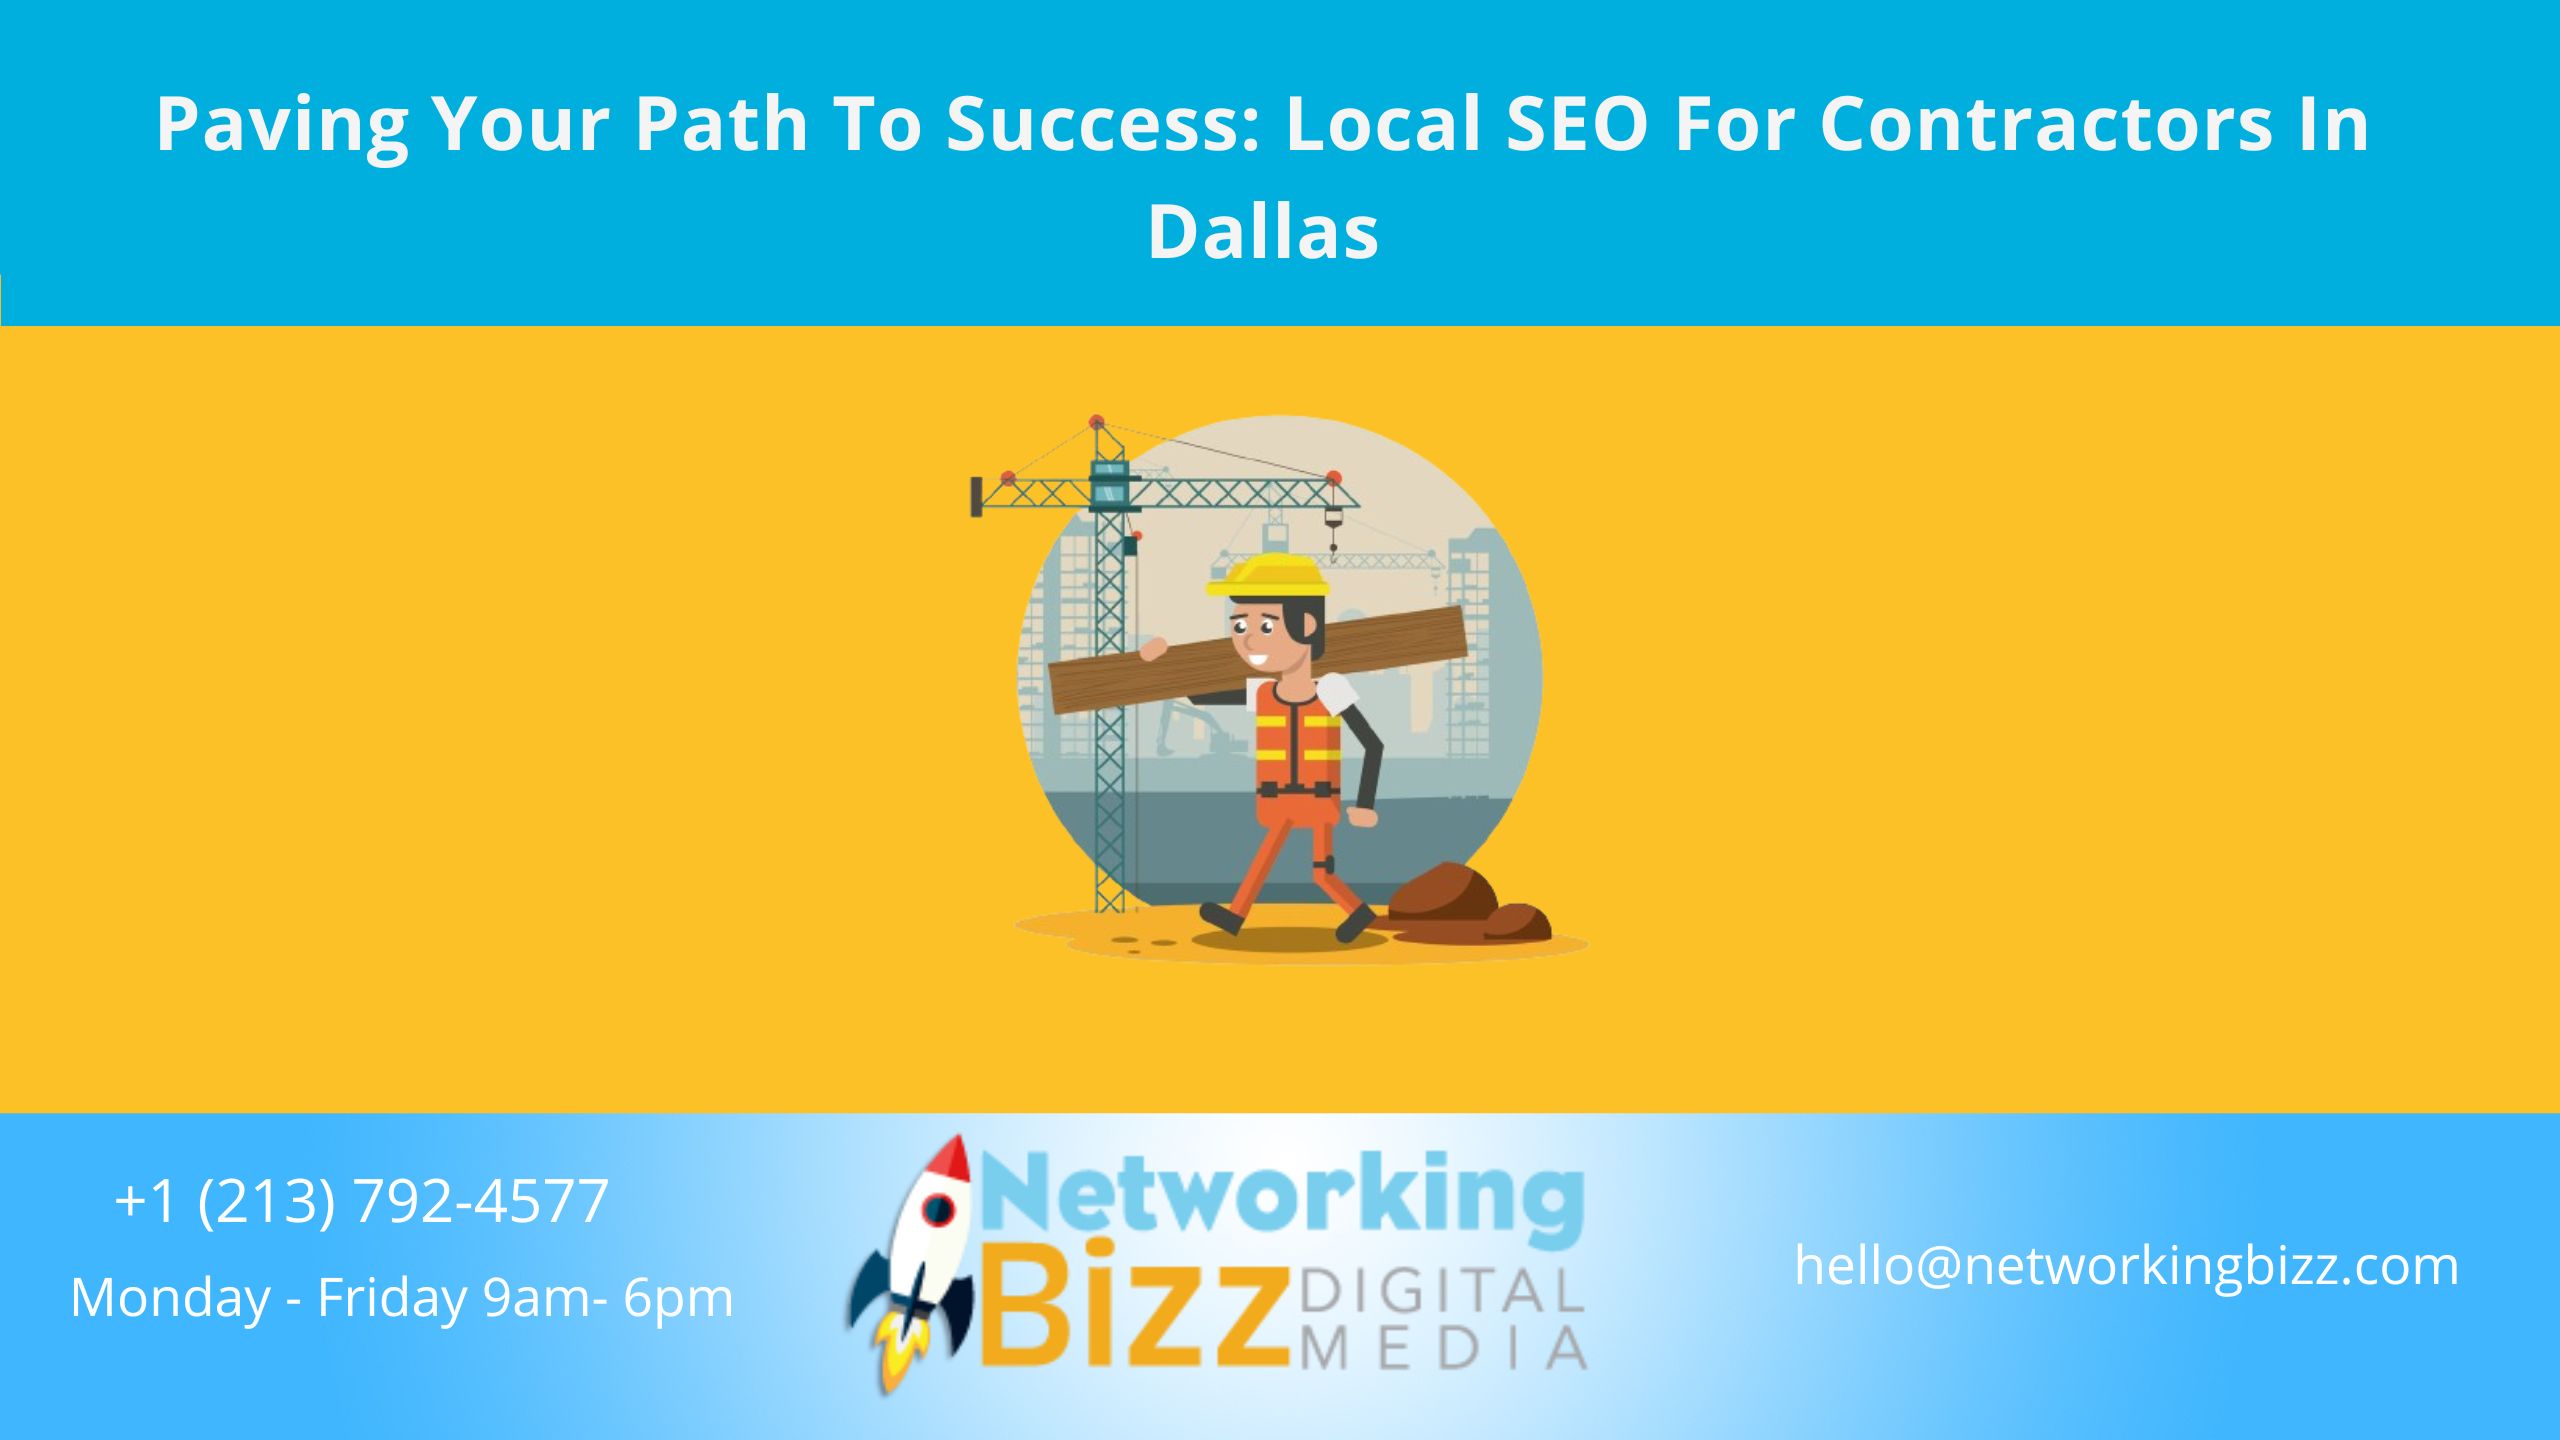 Paving Your Path To Success: Local SEO For Contractors In Dallas